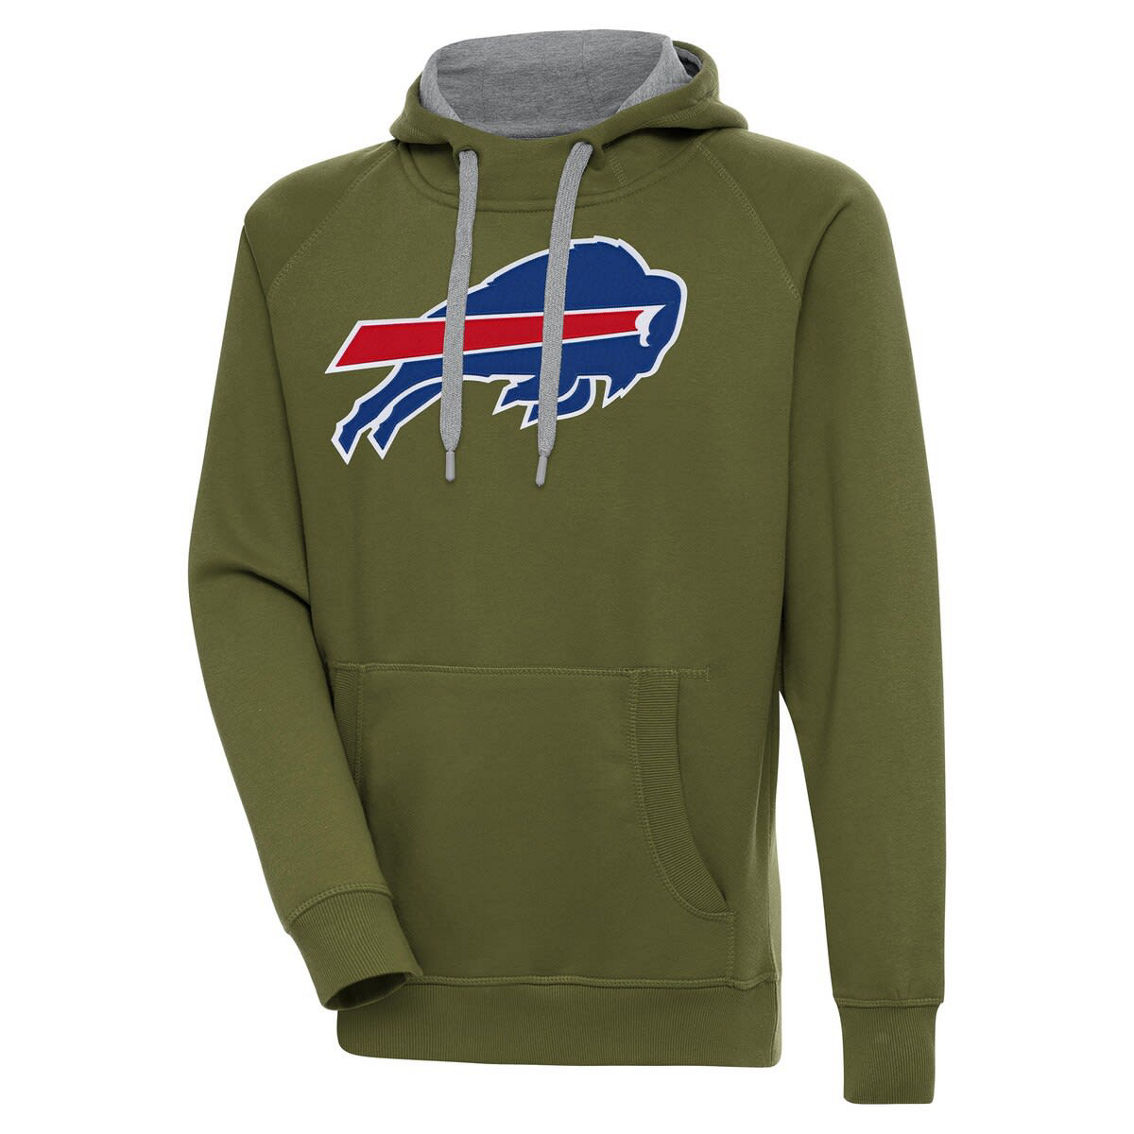 Antigua Men's Olive Buffalo Bills Primary Logo Victory Pullover Hoodie - Image 2 of 2